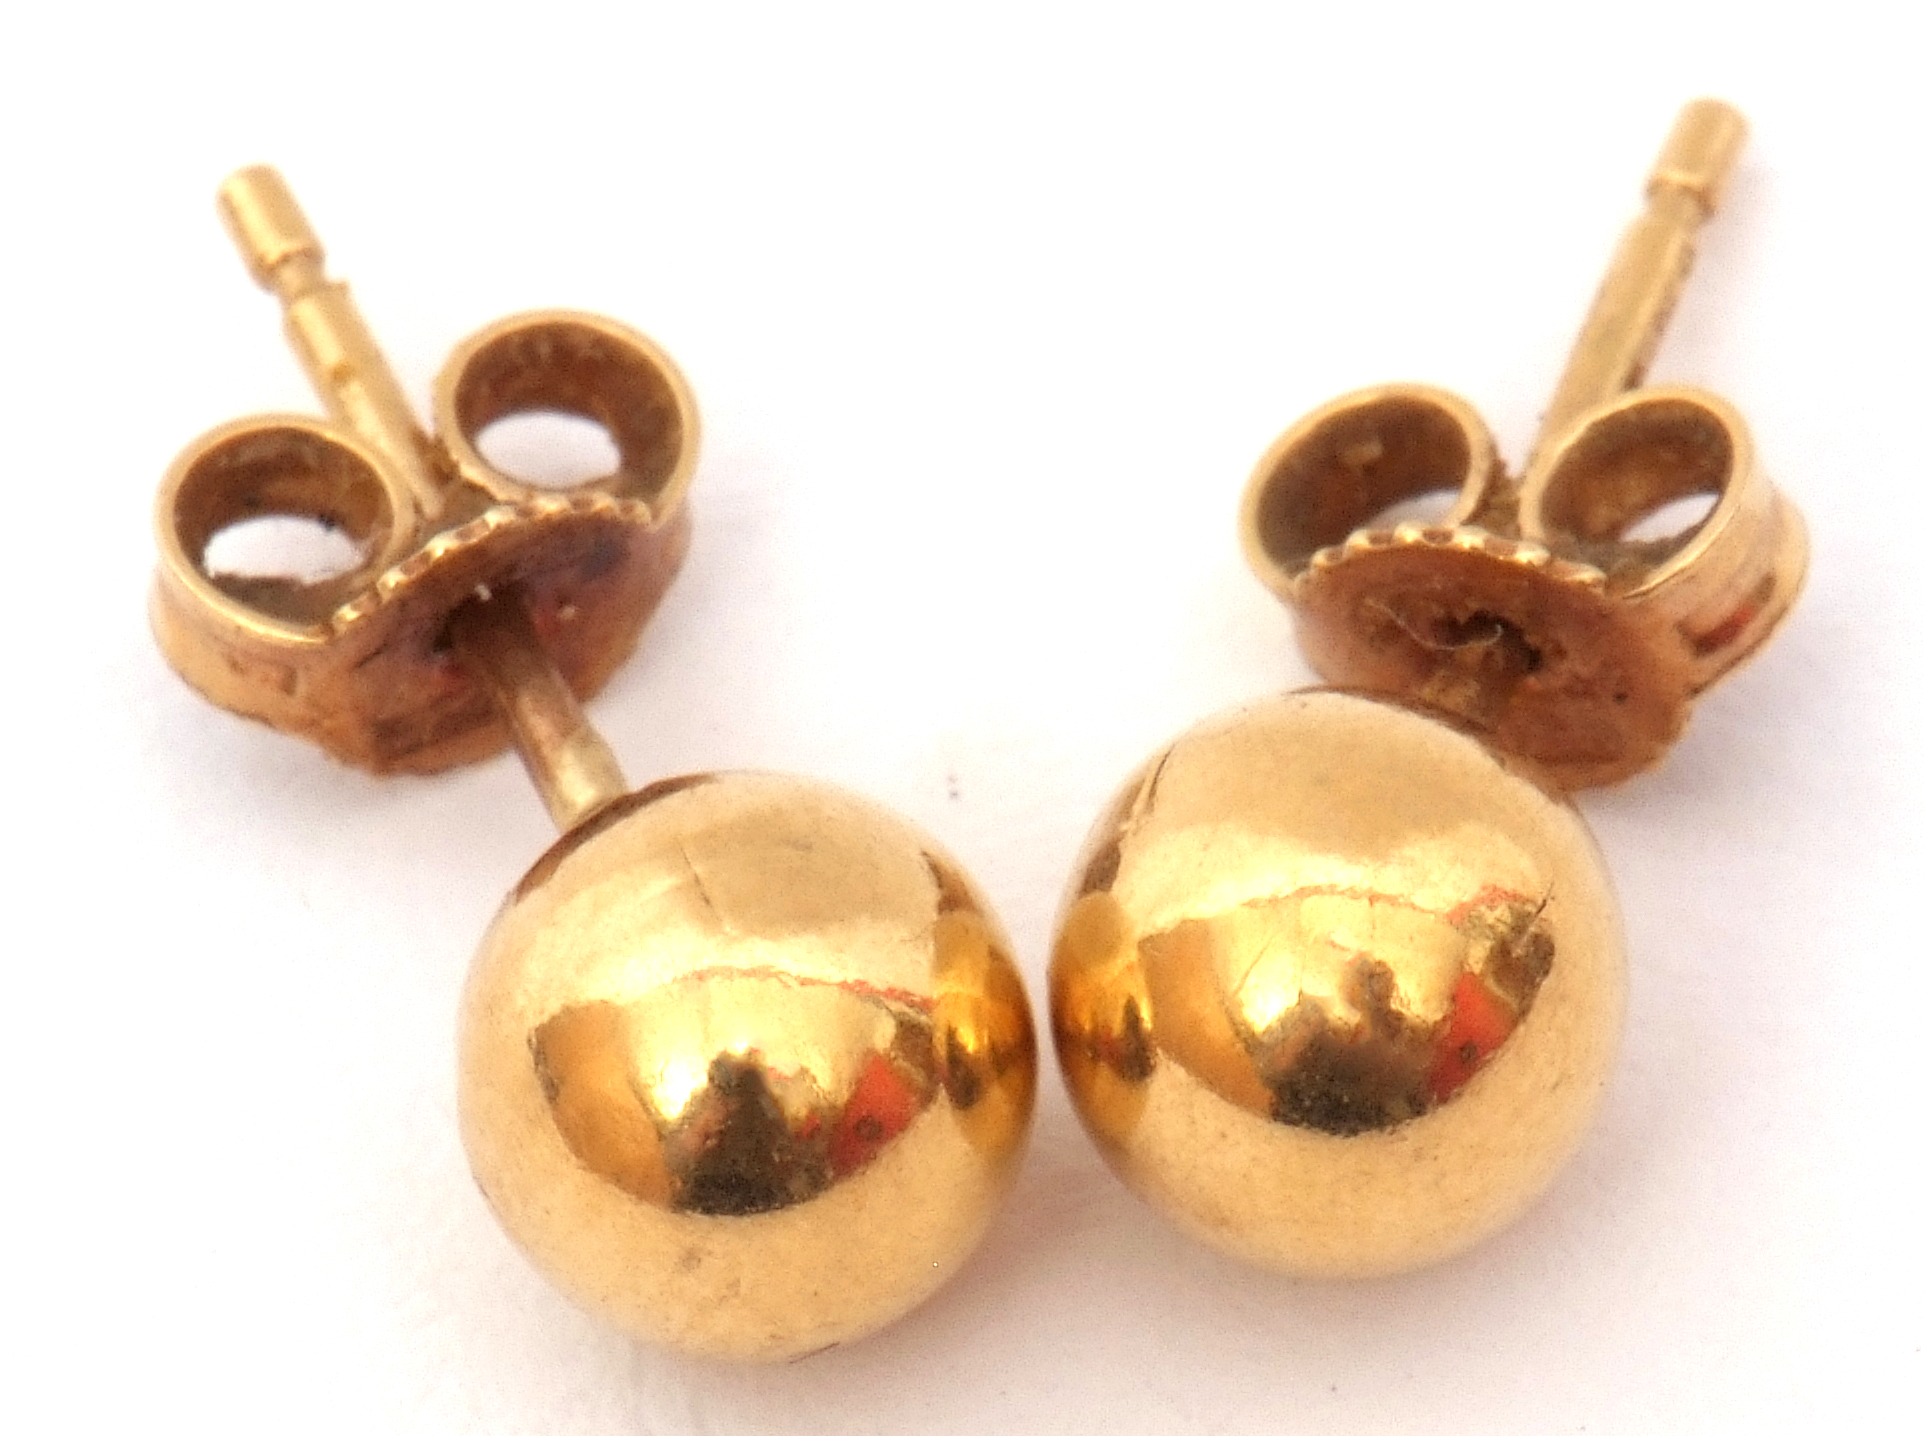 Pair of 750 stamped ball stud earrings, post fittings, 2gms - Image 3 of 4